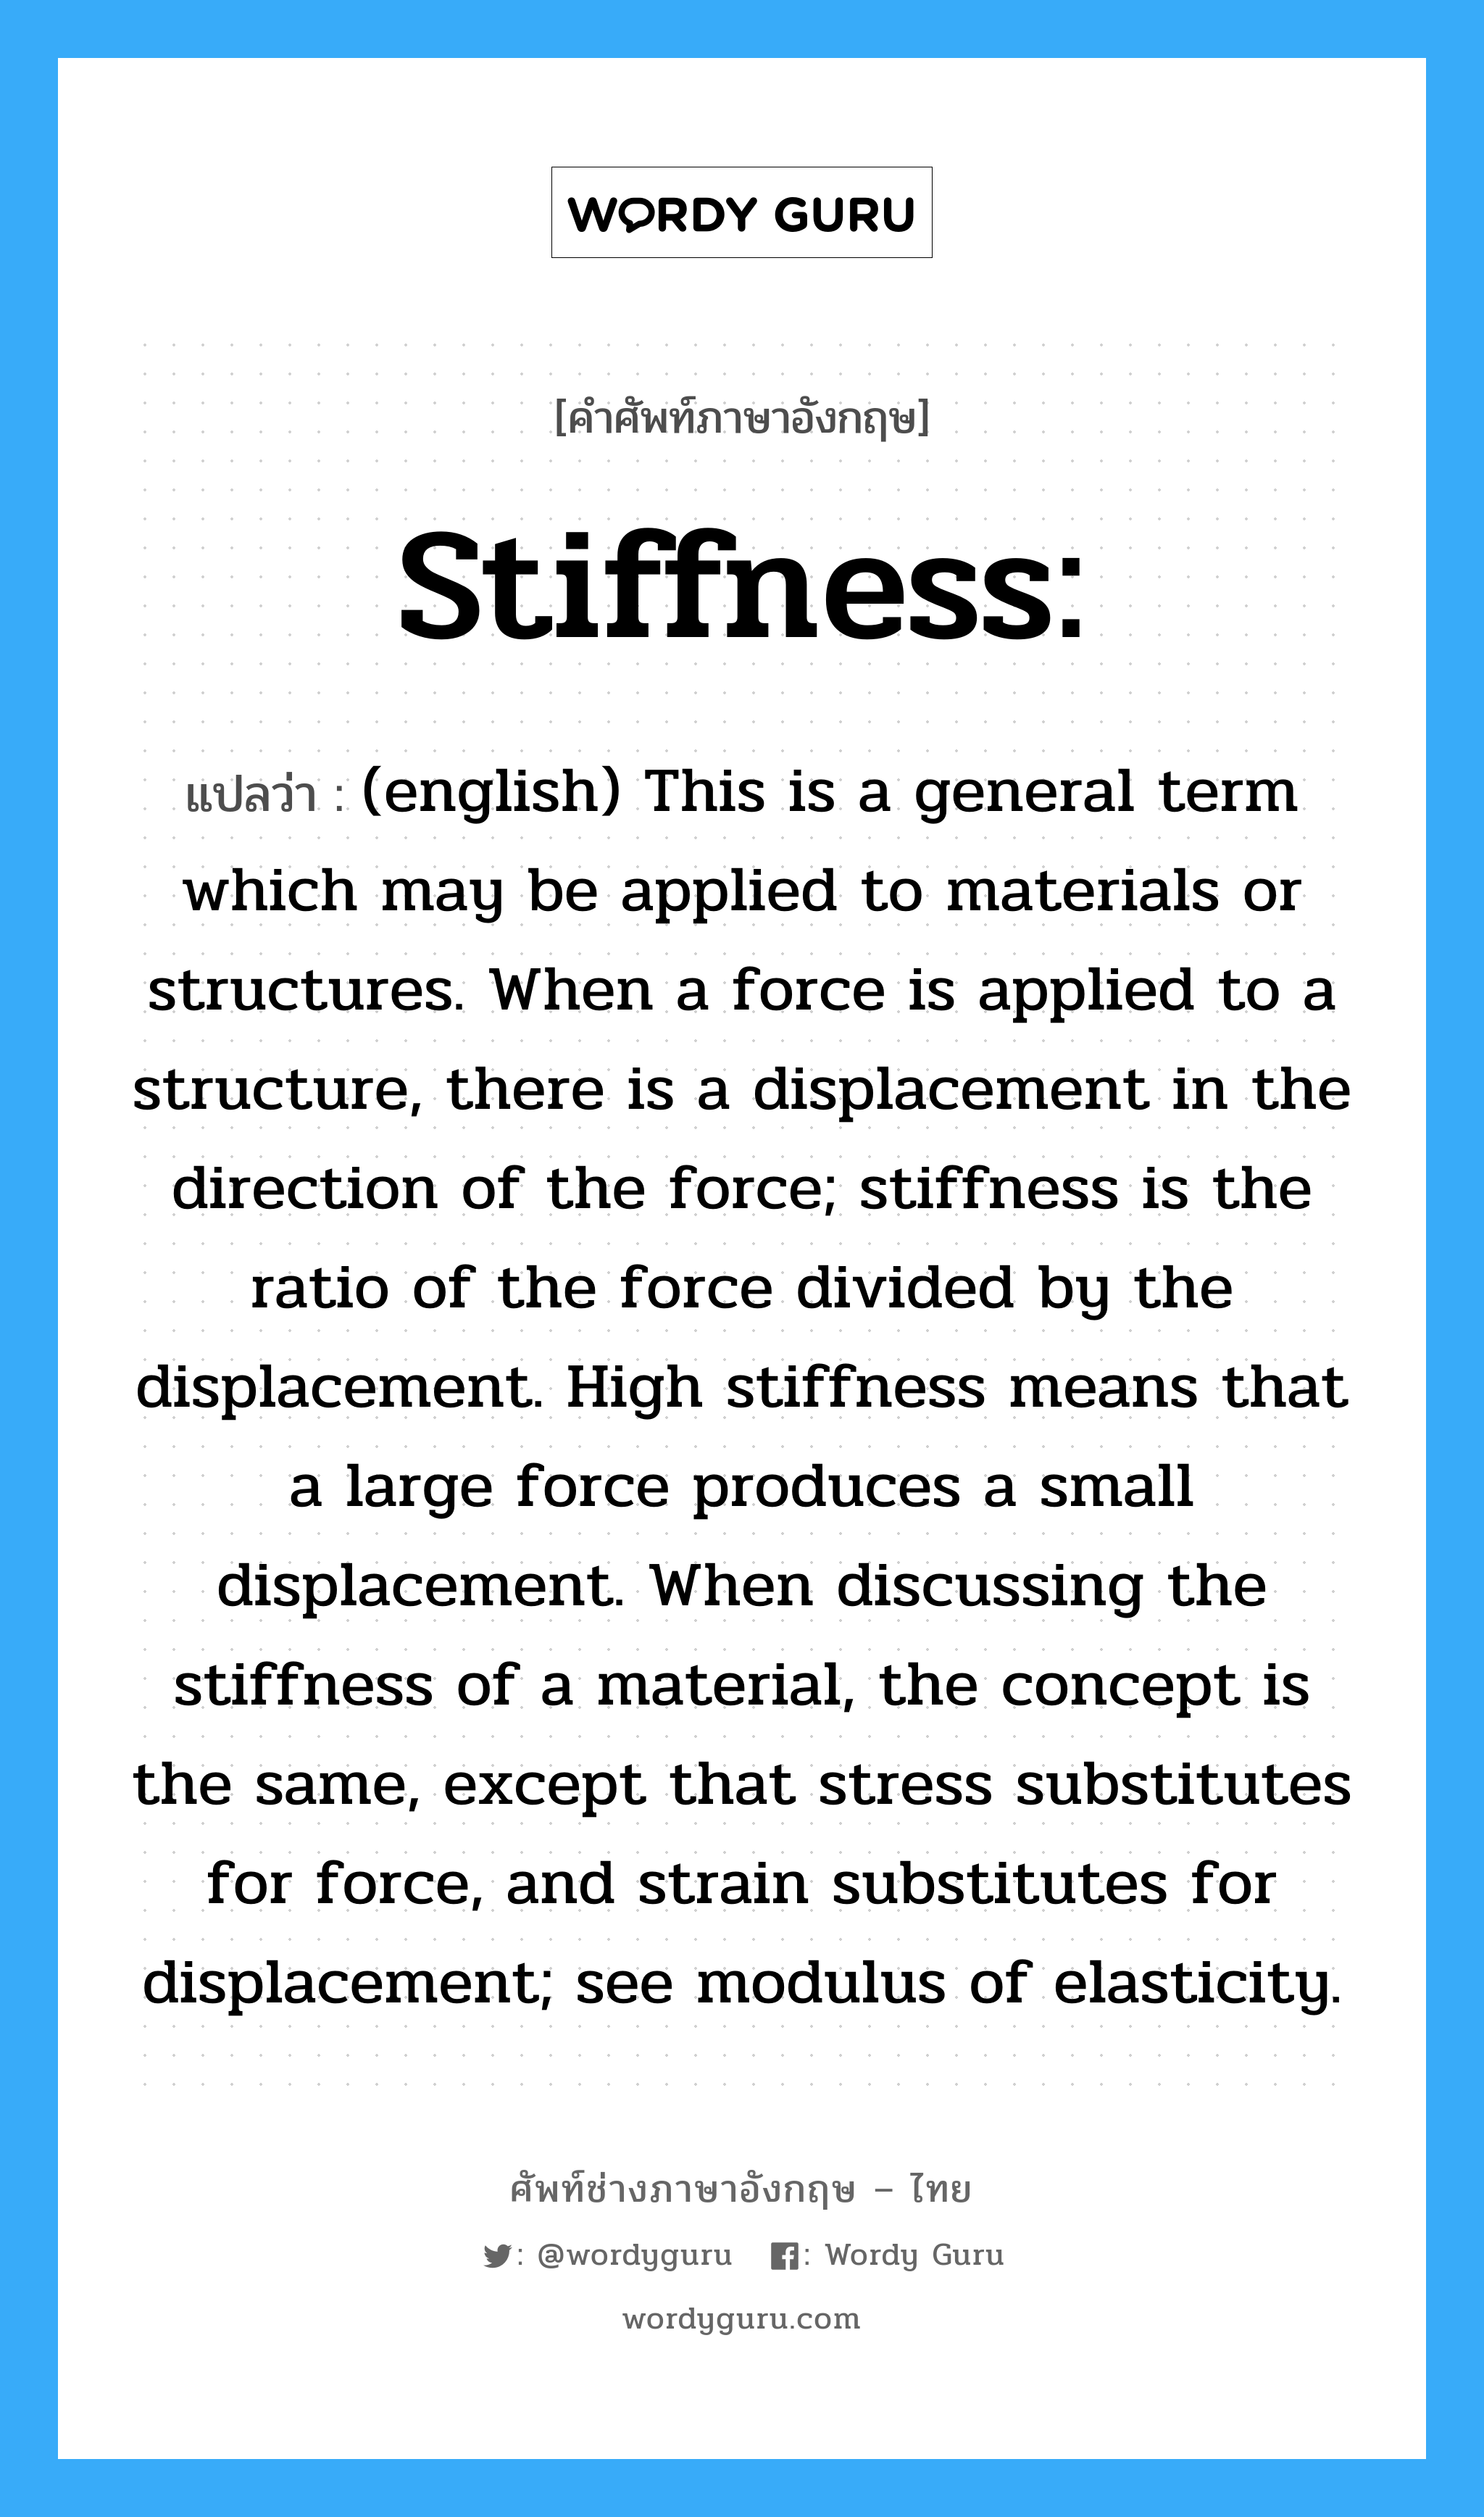 Stiffness: แปลว่า?, คำศัพท์ช่างภาษาอังกฤษ - ไทย Stiffness: คำศัพท์ภาษาอังกฤษ Stiffness: แปลว่า (english) This is a general term which may be applied to materials or structures. When a force is applied to a structure, there is a displacement in the direction of the force; stiffness is the ratio of the force divided by the displacement. High stiffness means that a large force produces a small displacement. When discussing the stiffness of a material, the concept is the same, except that stress substitutes for force, and strain substitutes for displacement; see modulus of elasticity.